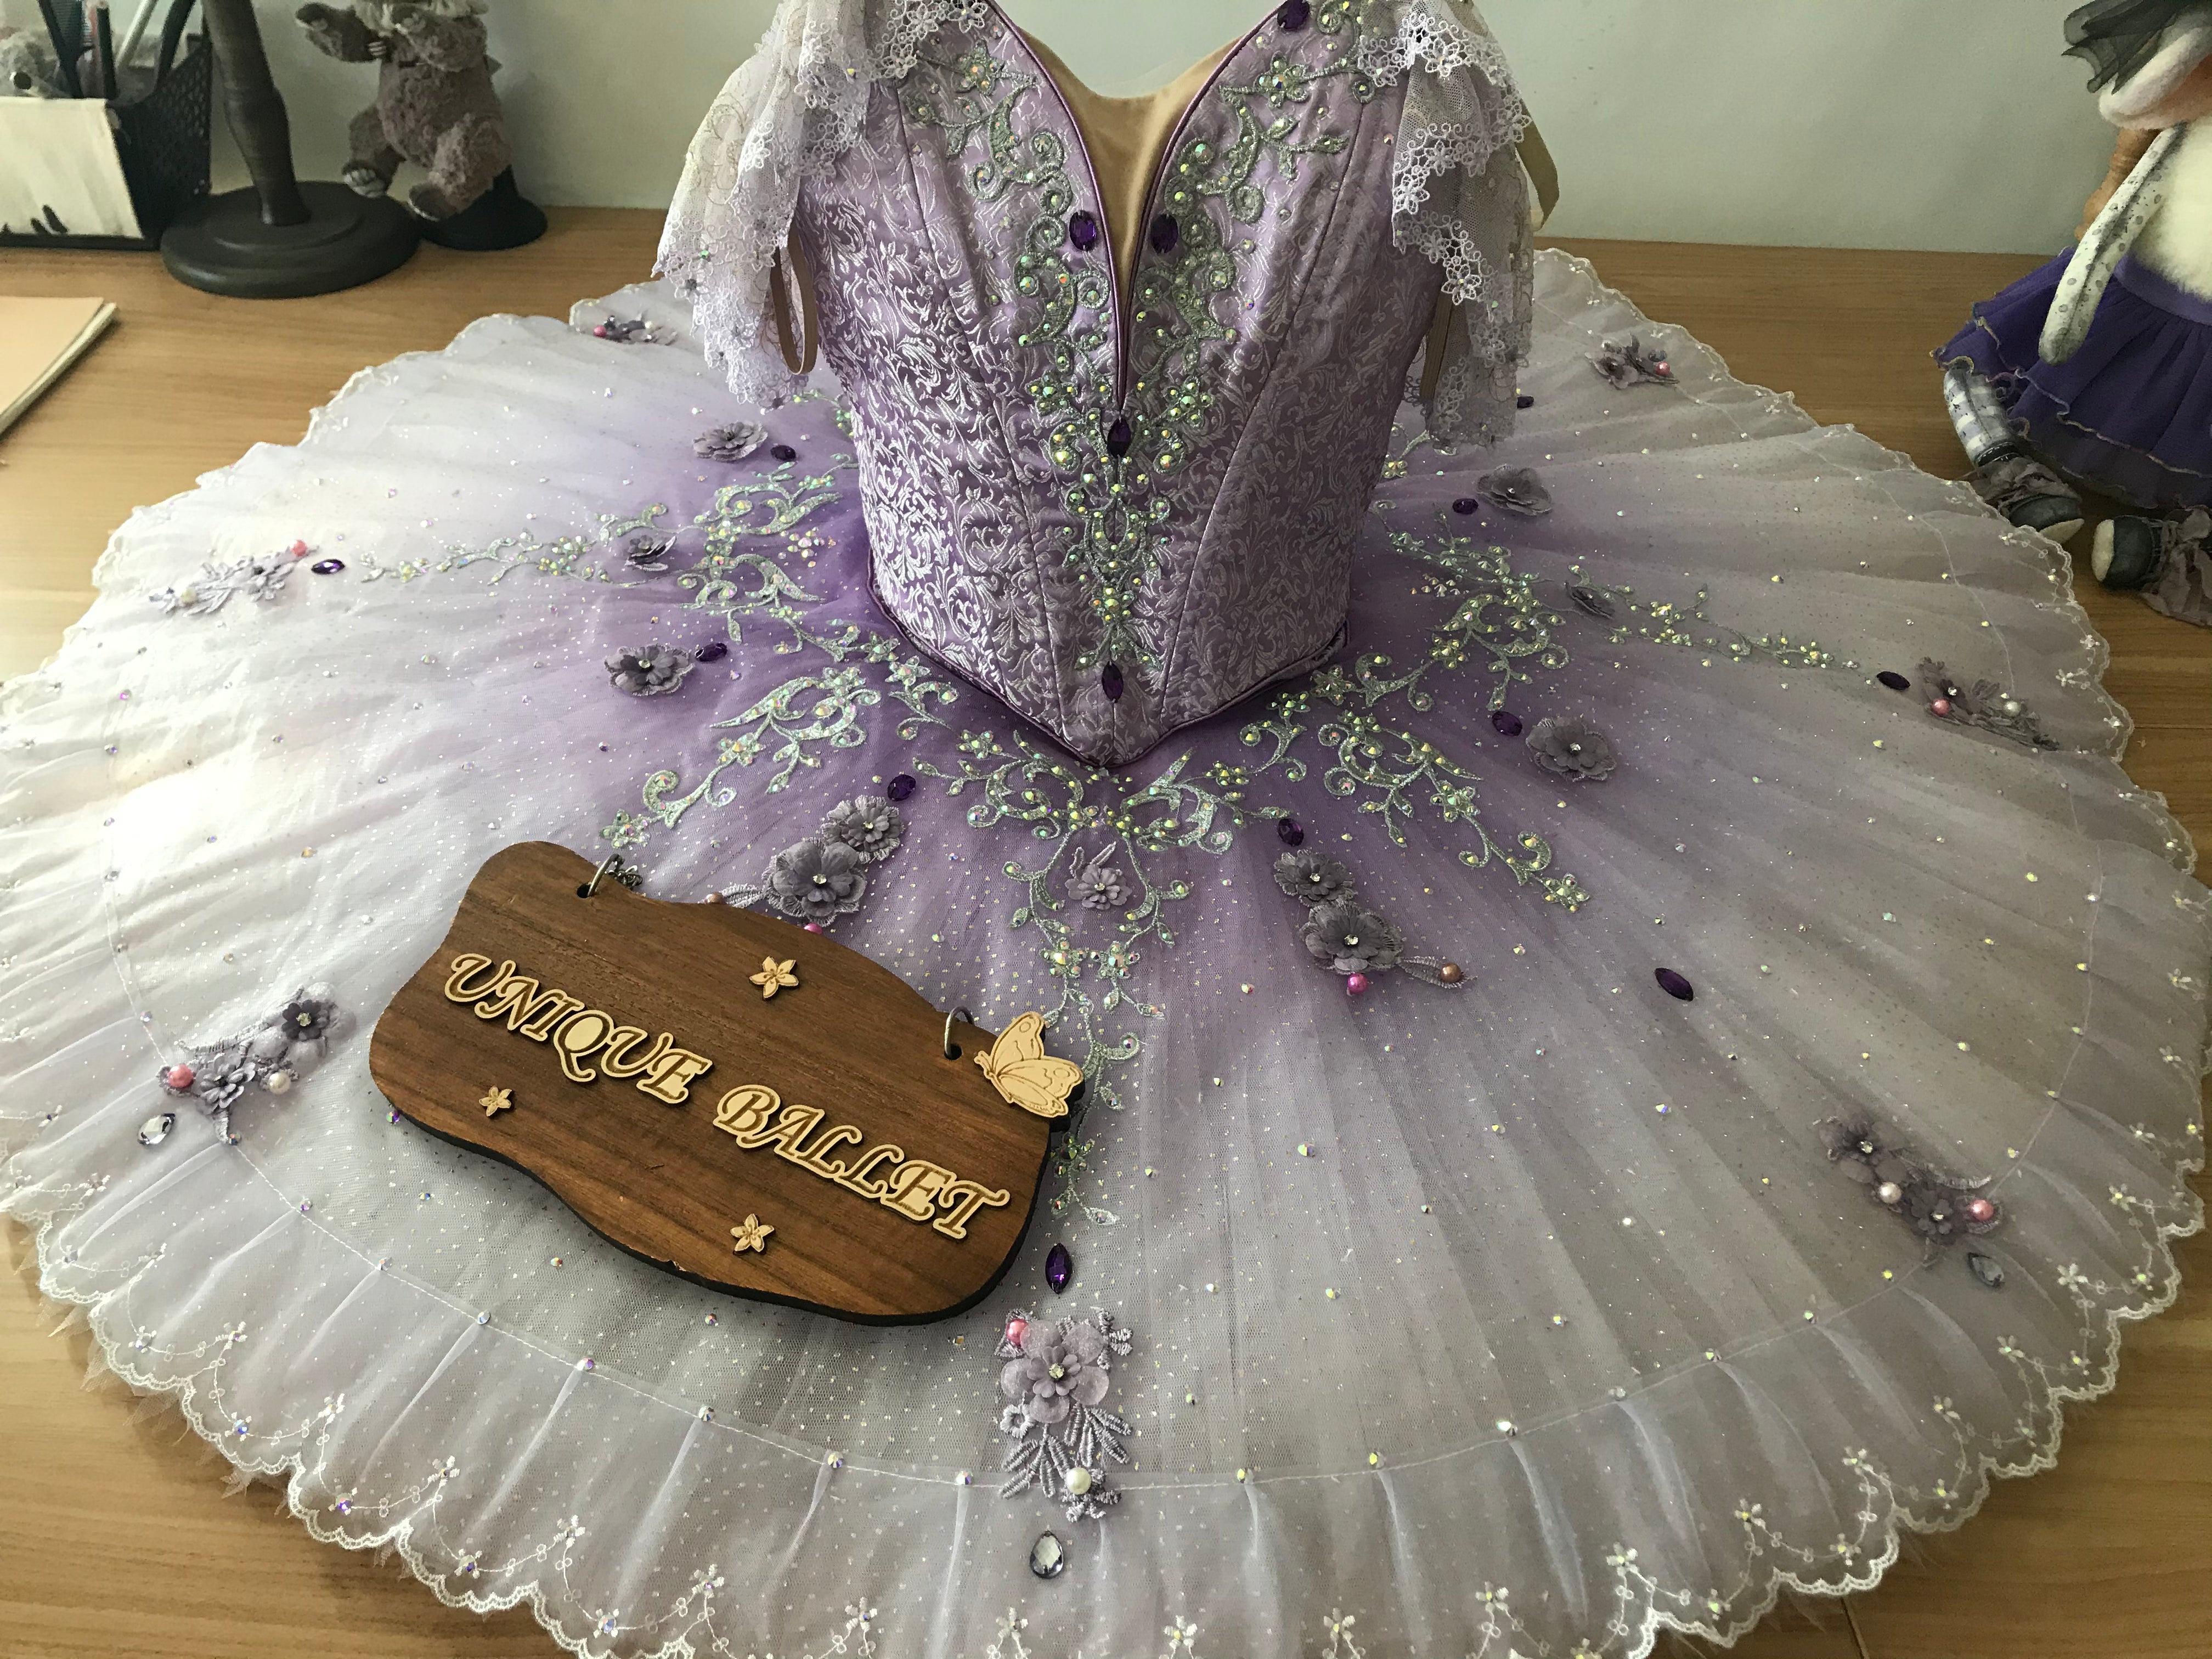 New High-end Professional Lilac Fairy Classical Ballet TuTu Costume 2 Pieces France Style YAGP Ballet Costume Dance Wear